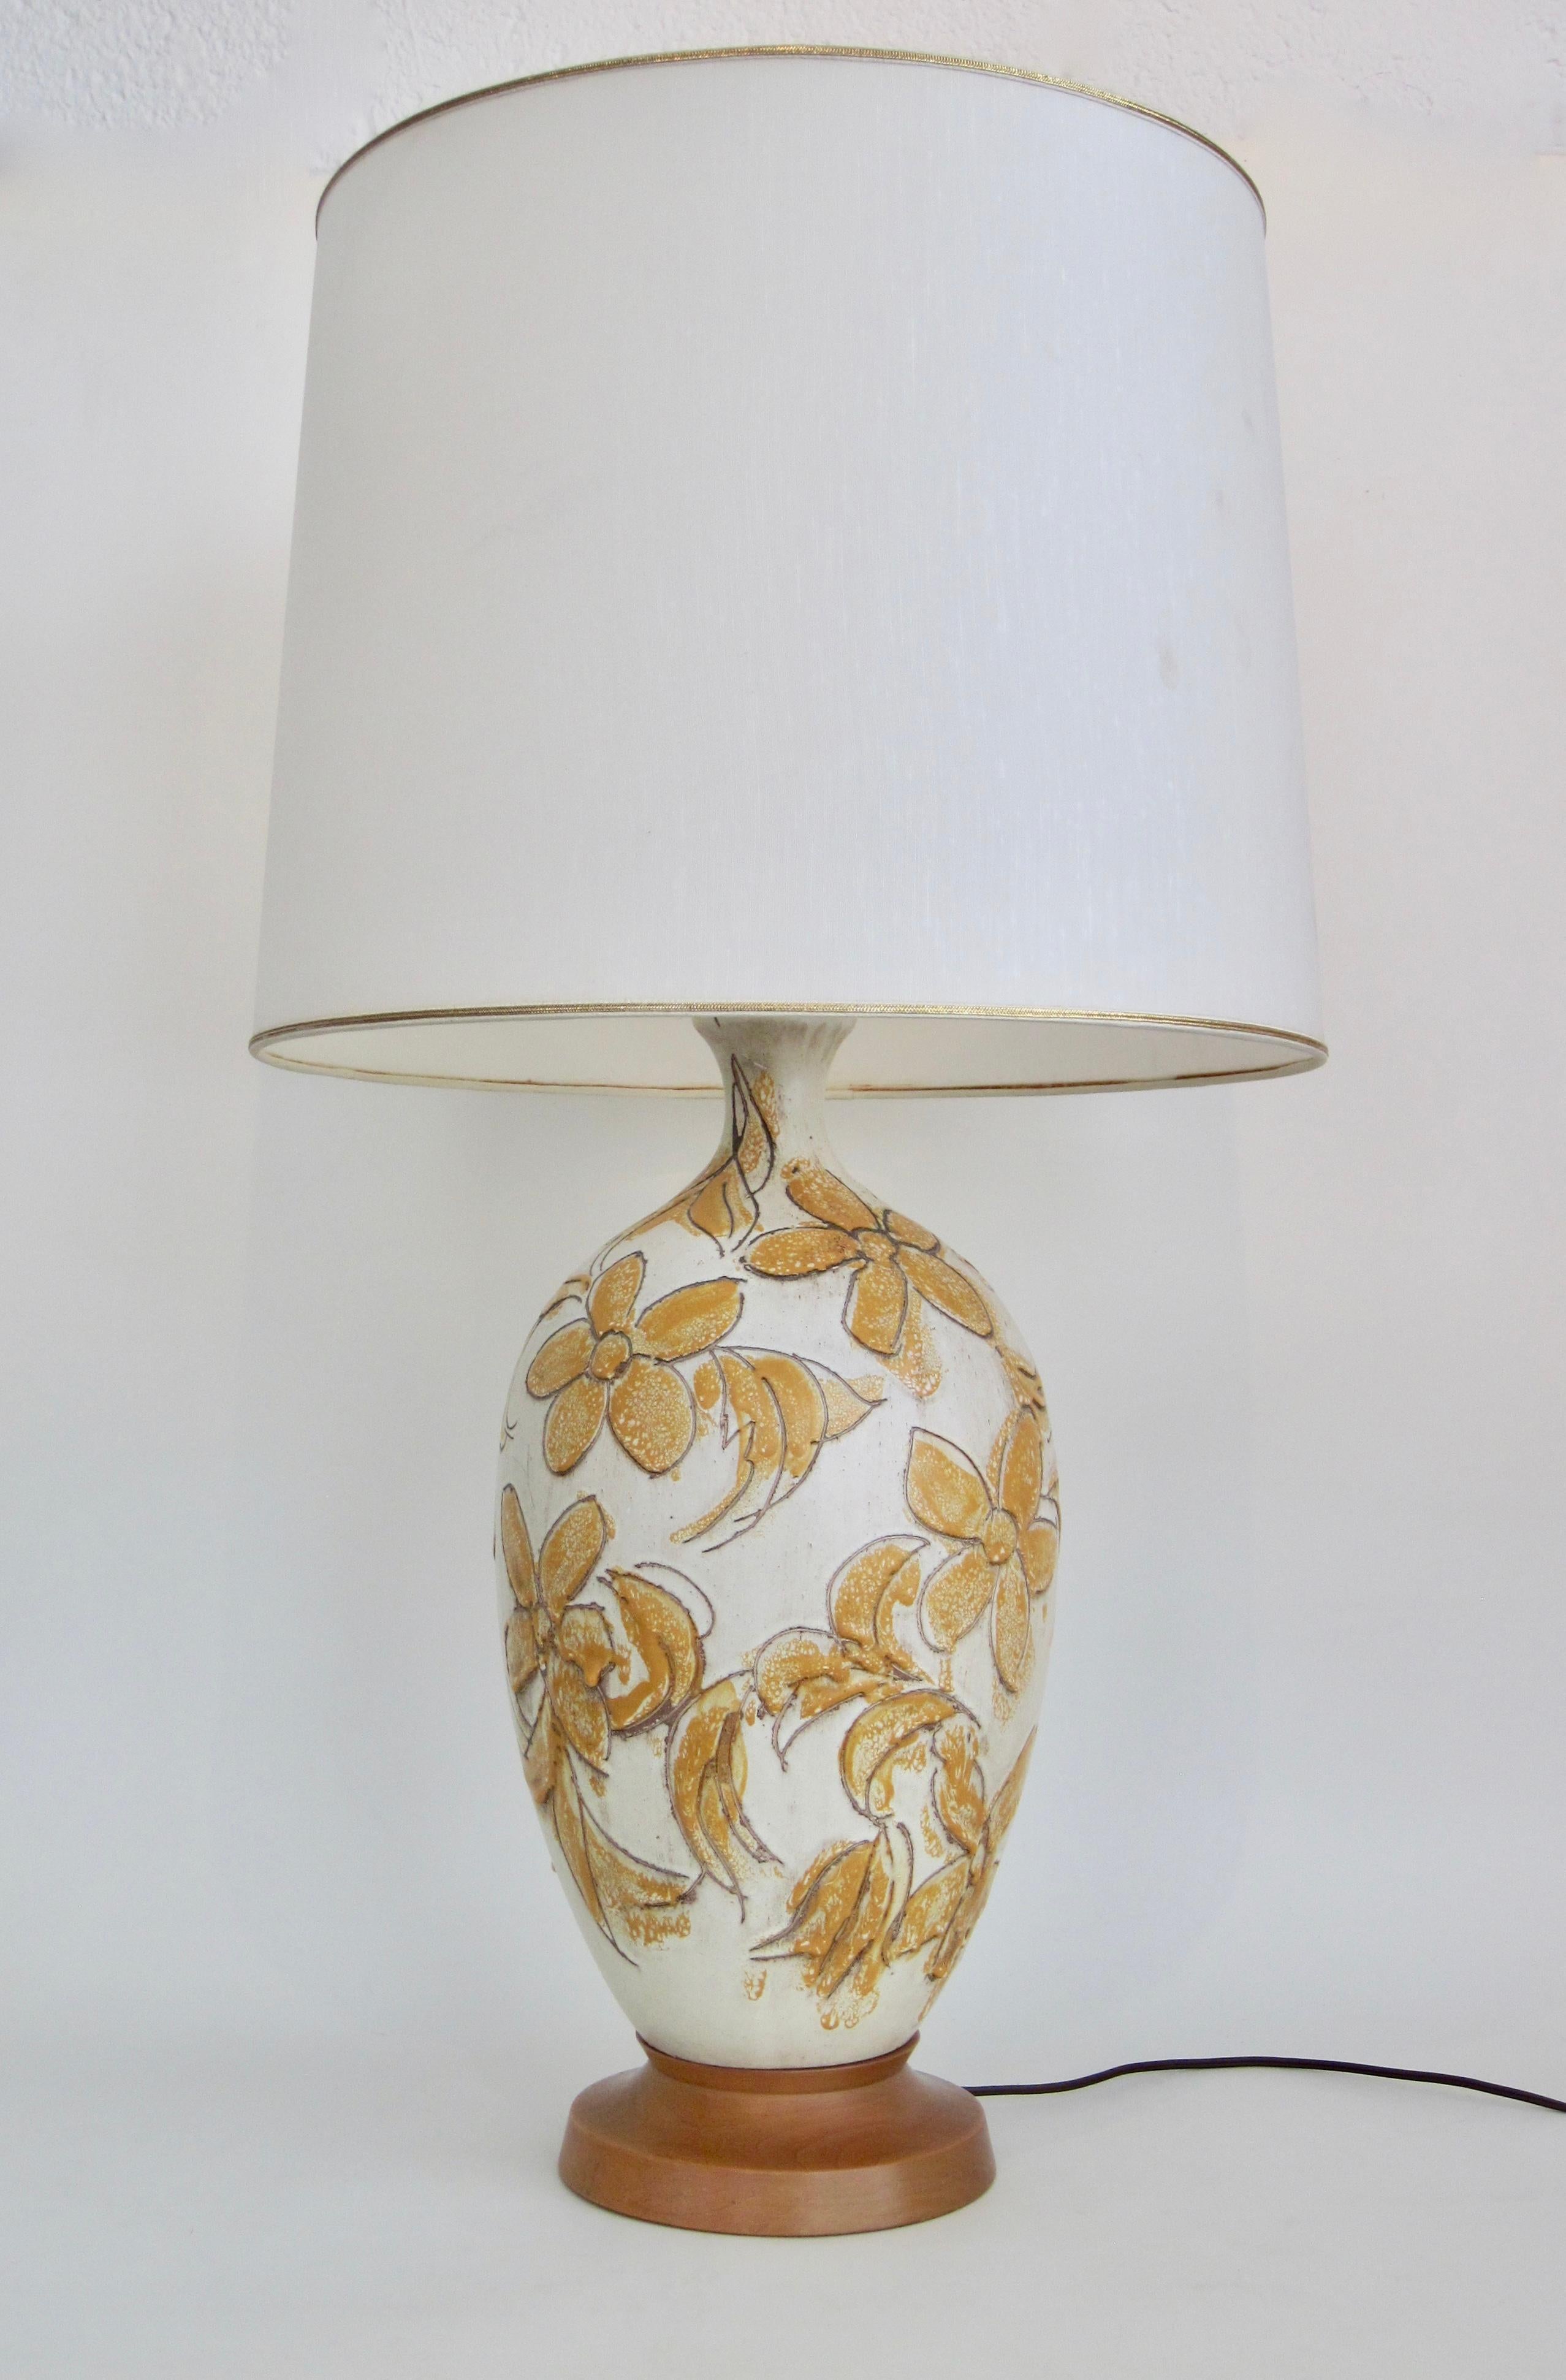 A distinctive design, this stoneware table lamp features incised flowers on a off white 21